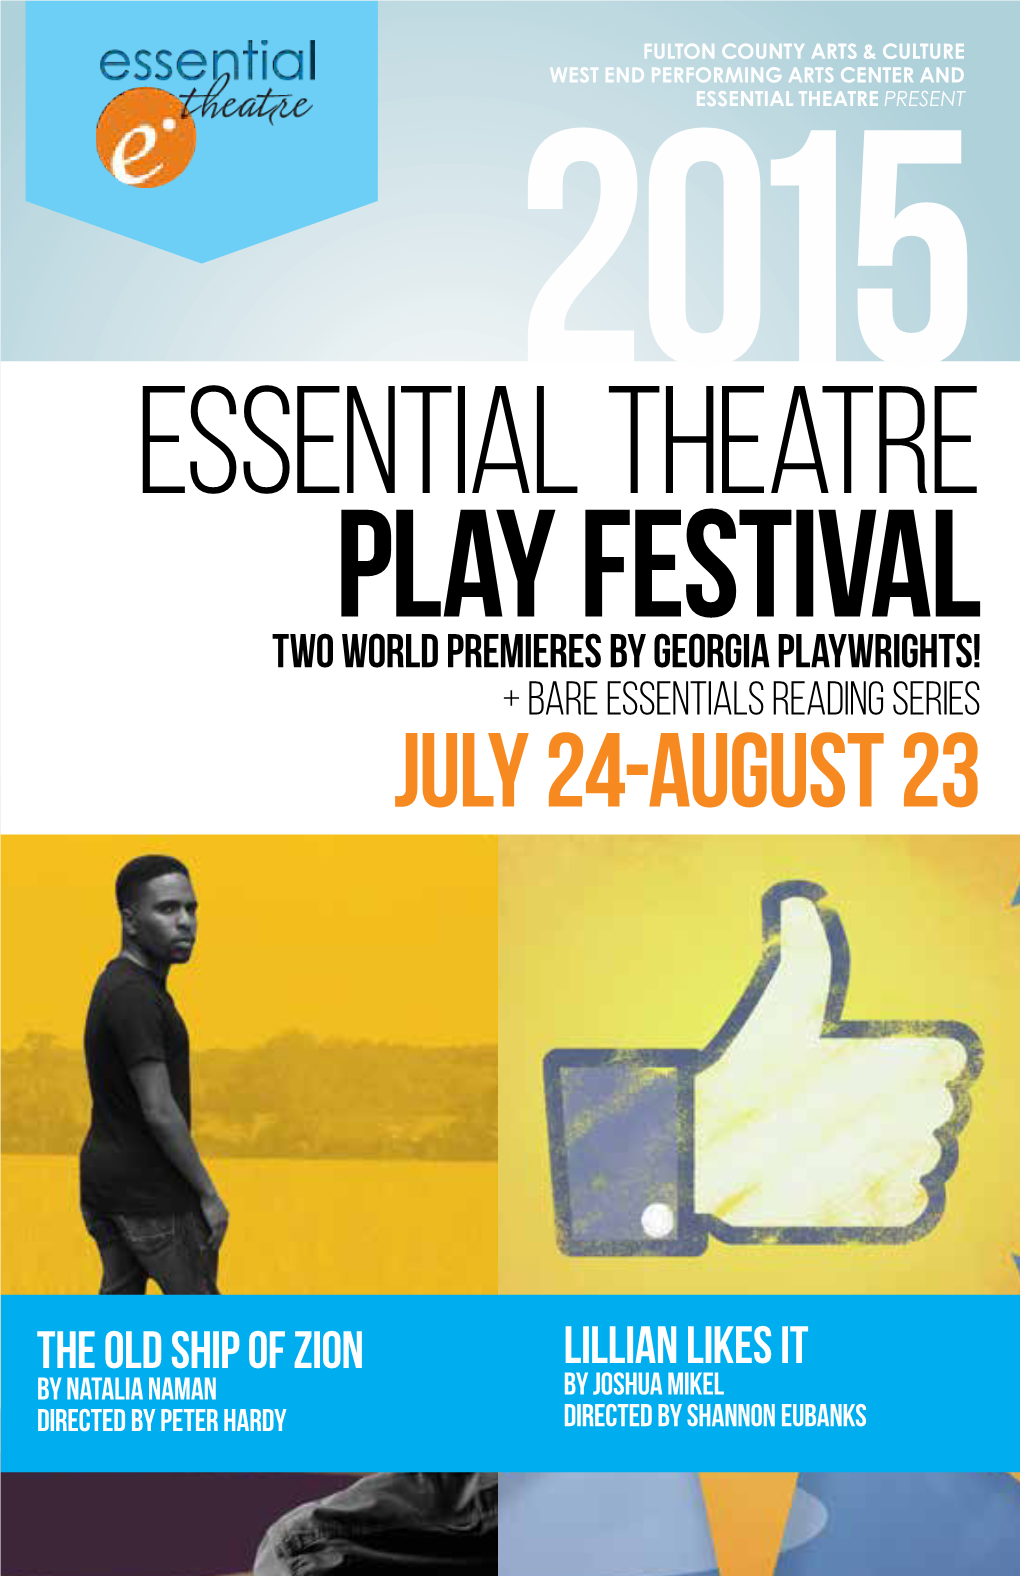 Essential Theatre Play Festival Two World Premieres by Georgia Playwrights! + Bare Essentials Reading Series July 24-August 23